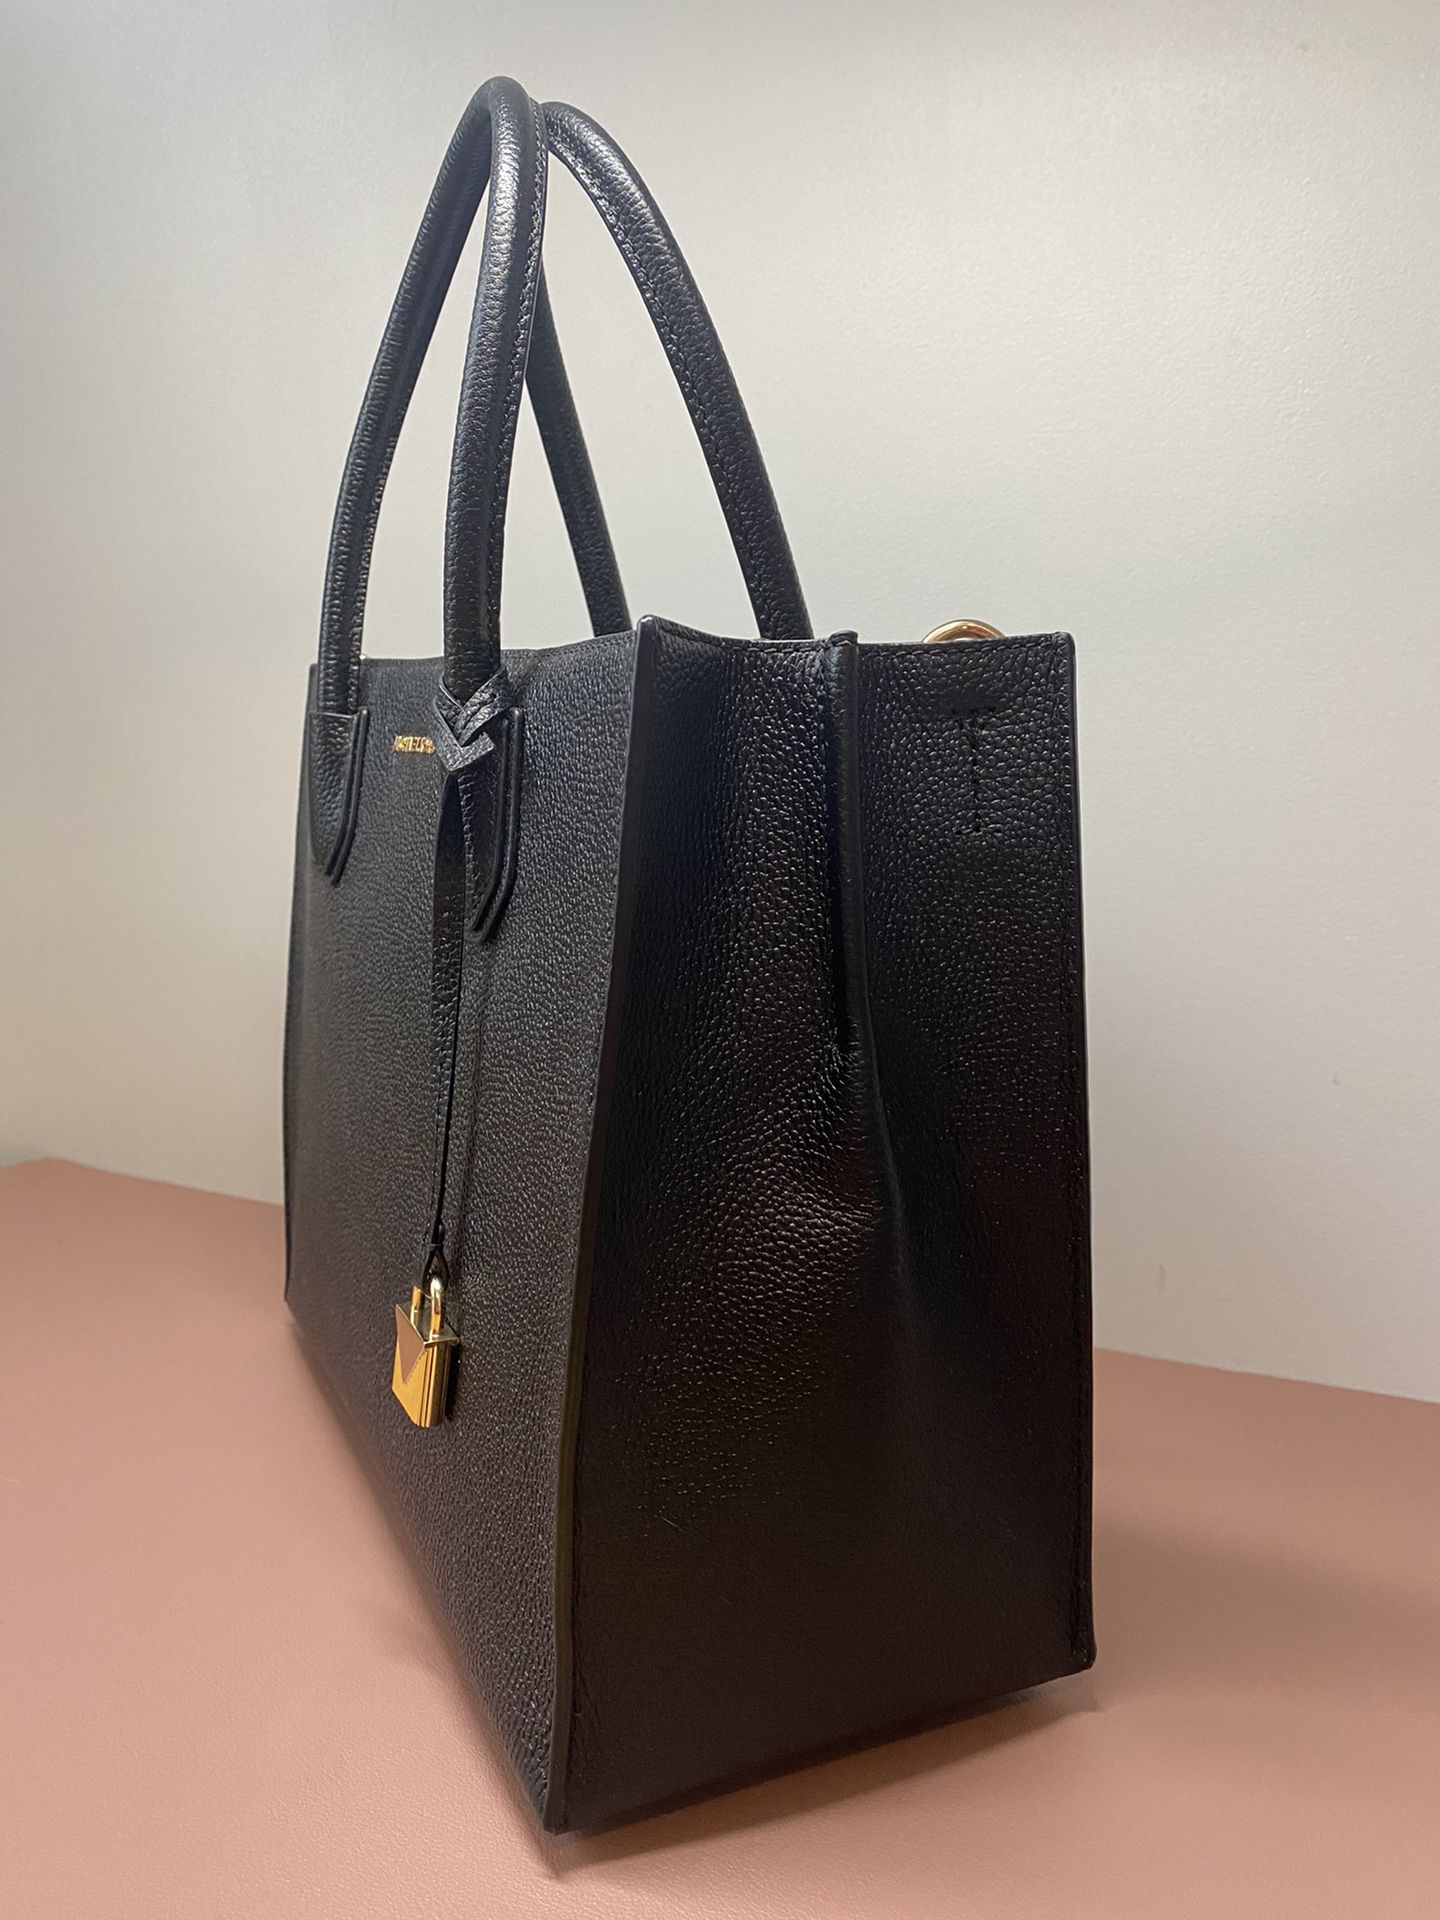 Michael+Kors+Pearl+Grey+Mercer+Large+Pebbled+Leather+Accordion+Tote+30f8sm9t3t  for sale online